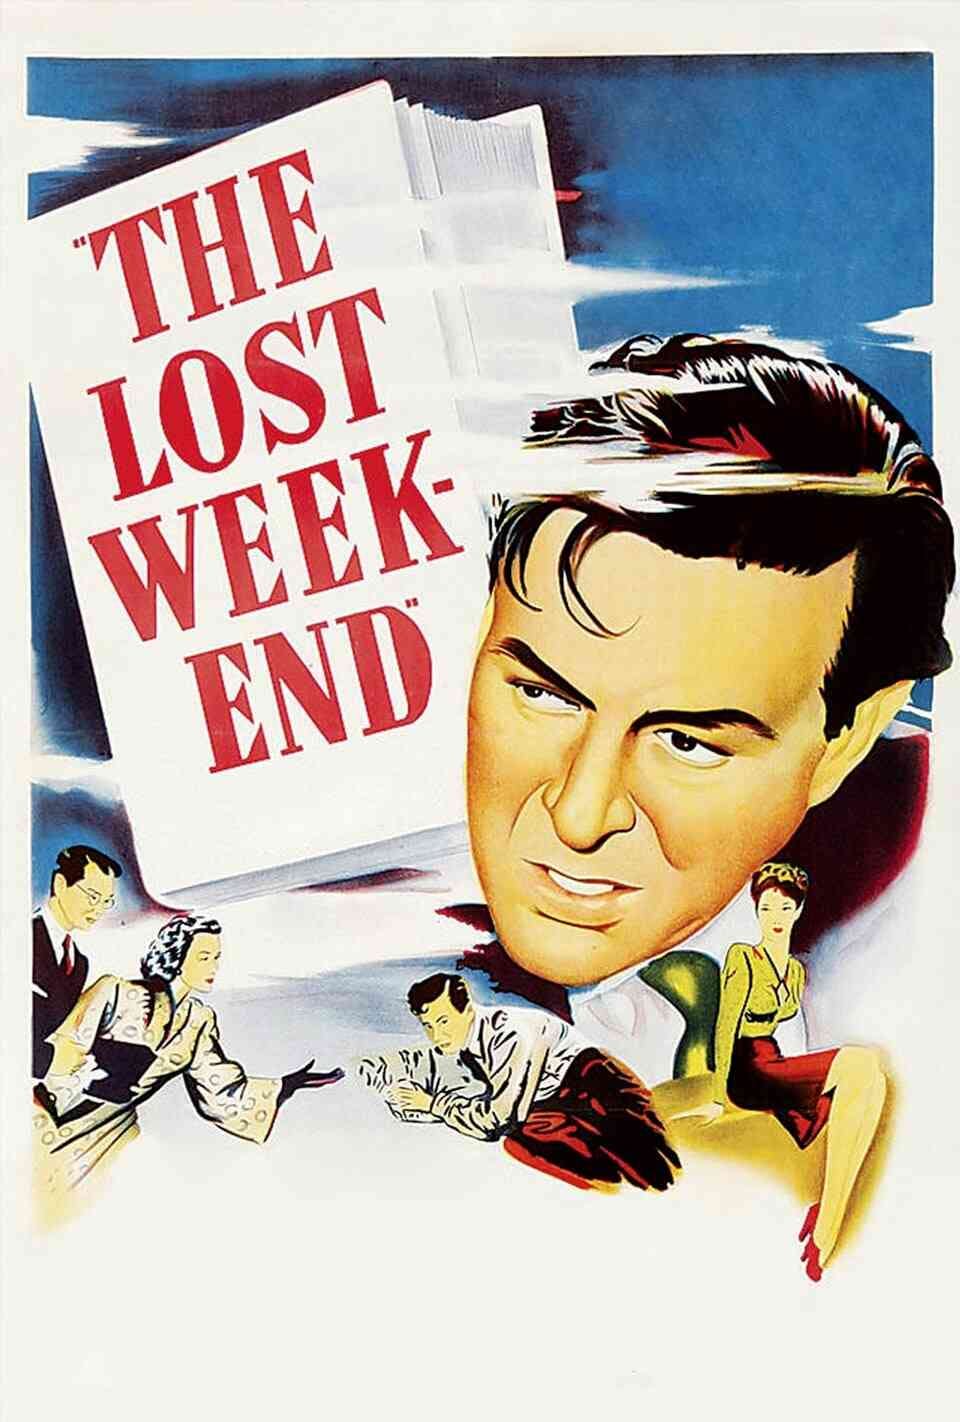 Read The Lost Weekend screenplay (poster)